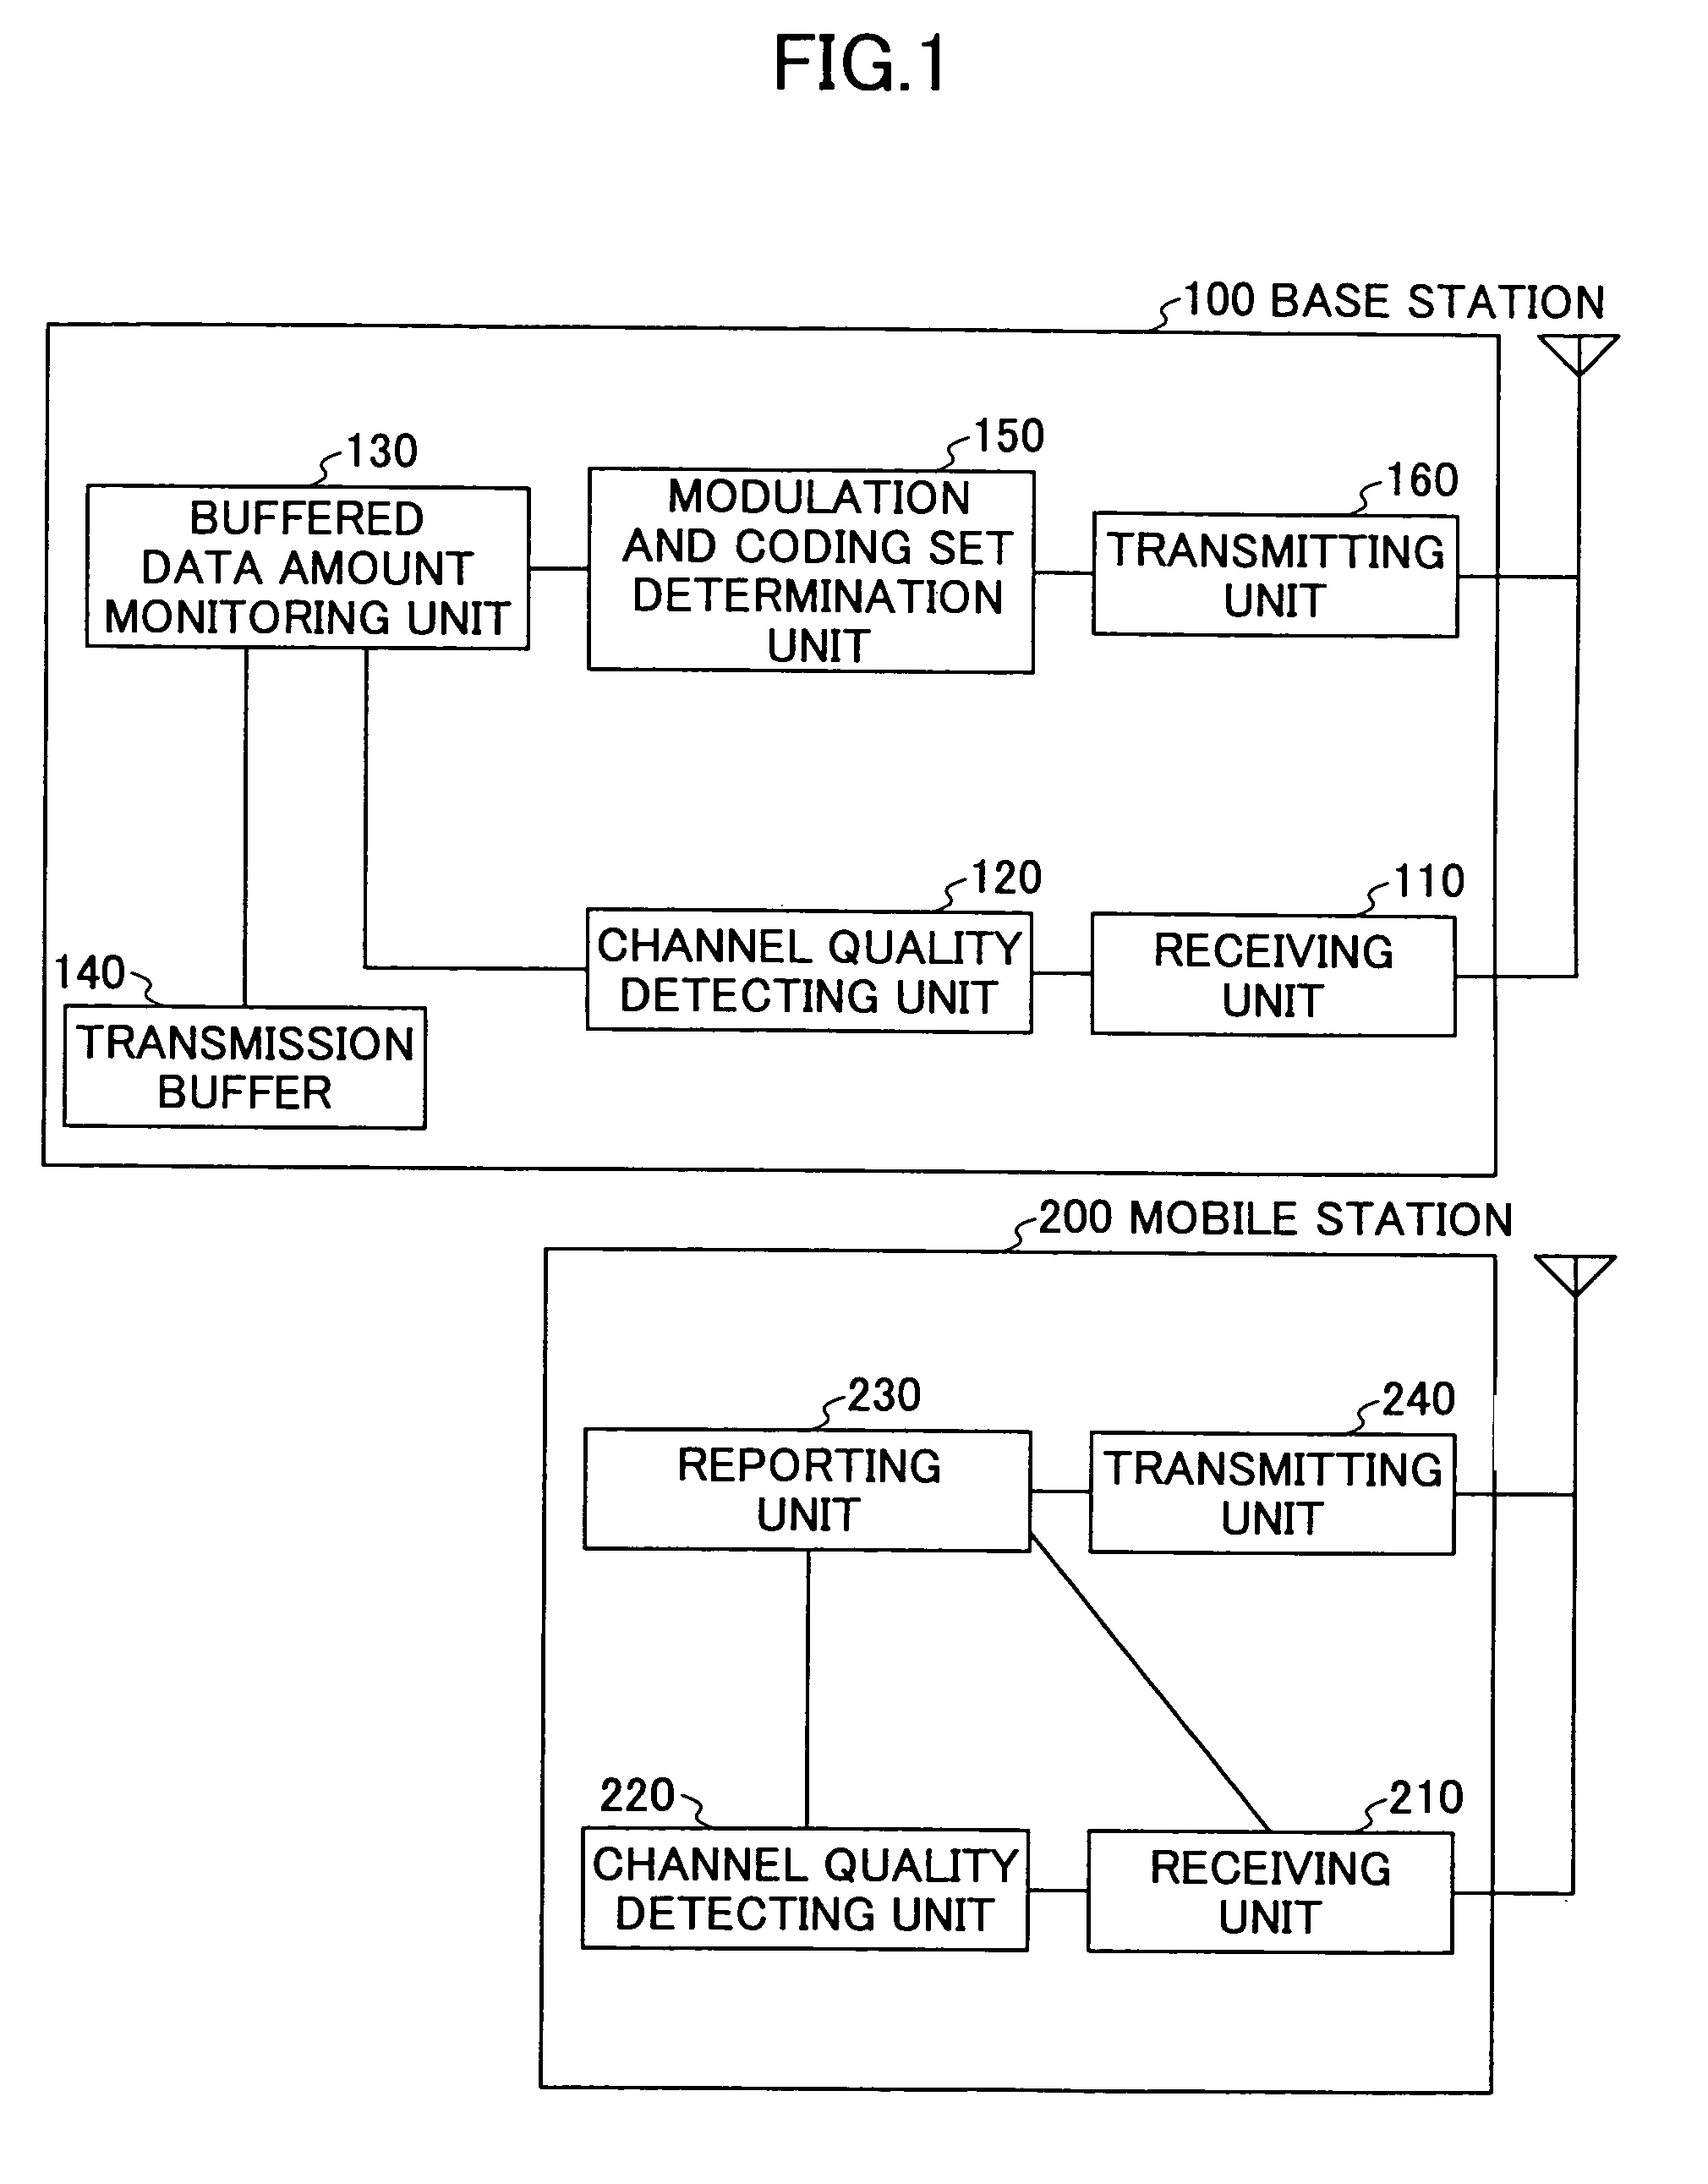 Packet communications taking into account channel quality and buffered data amount